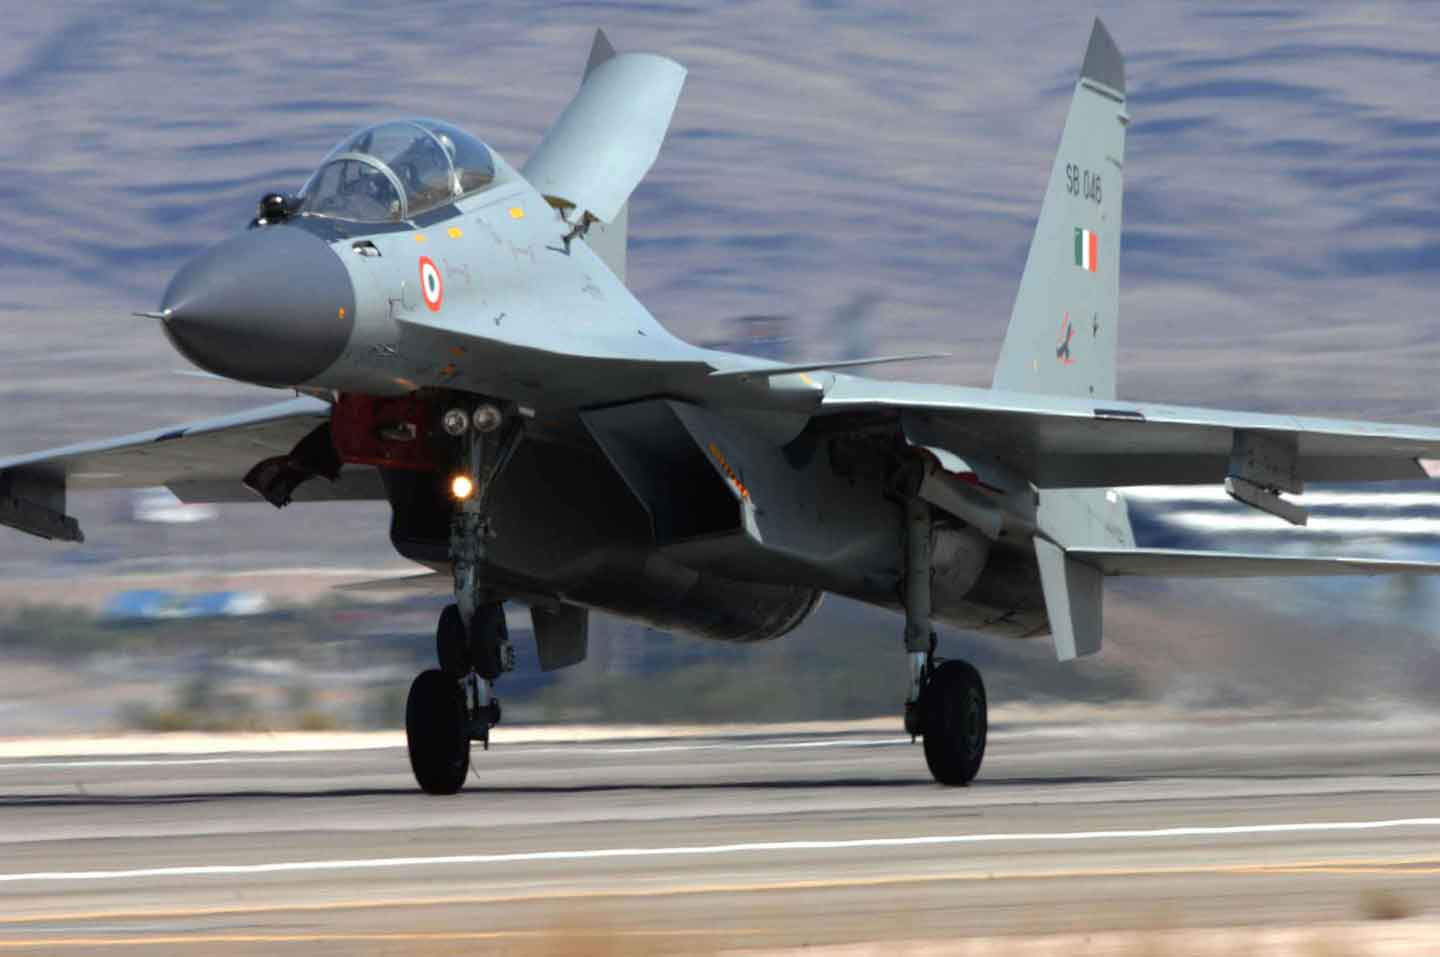 IAF’s Sukhoi-30: Bloodstained shoe, wallet found, no trace of pilots